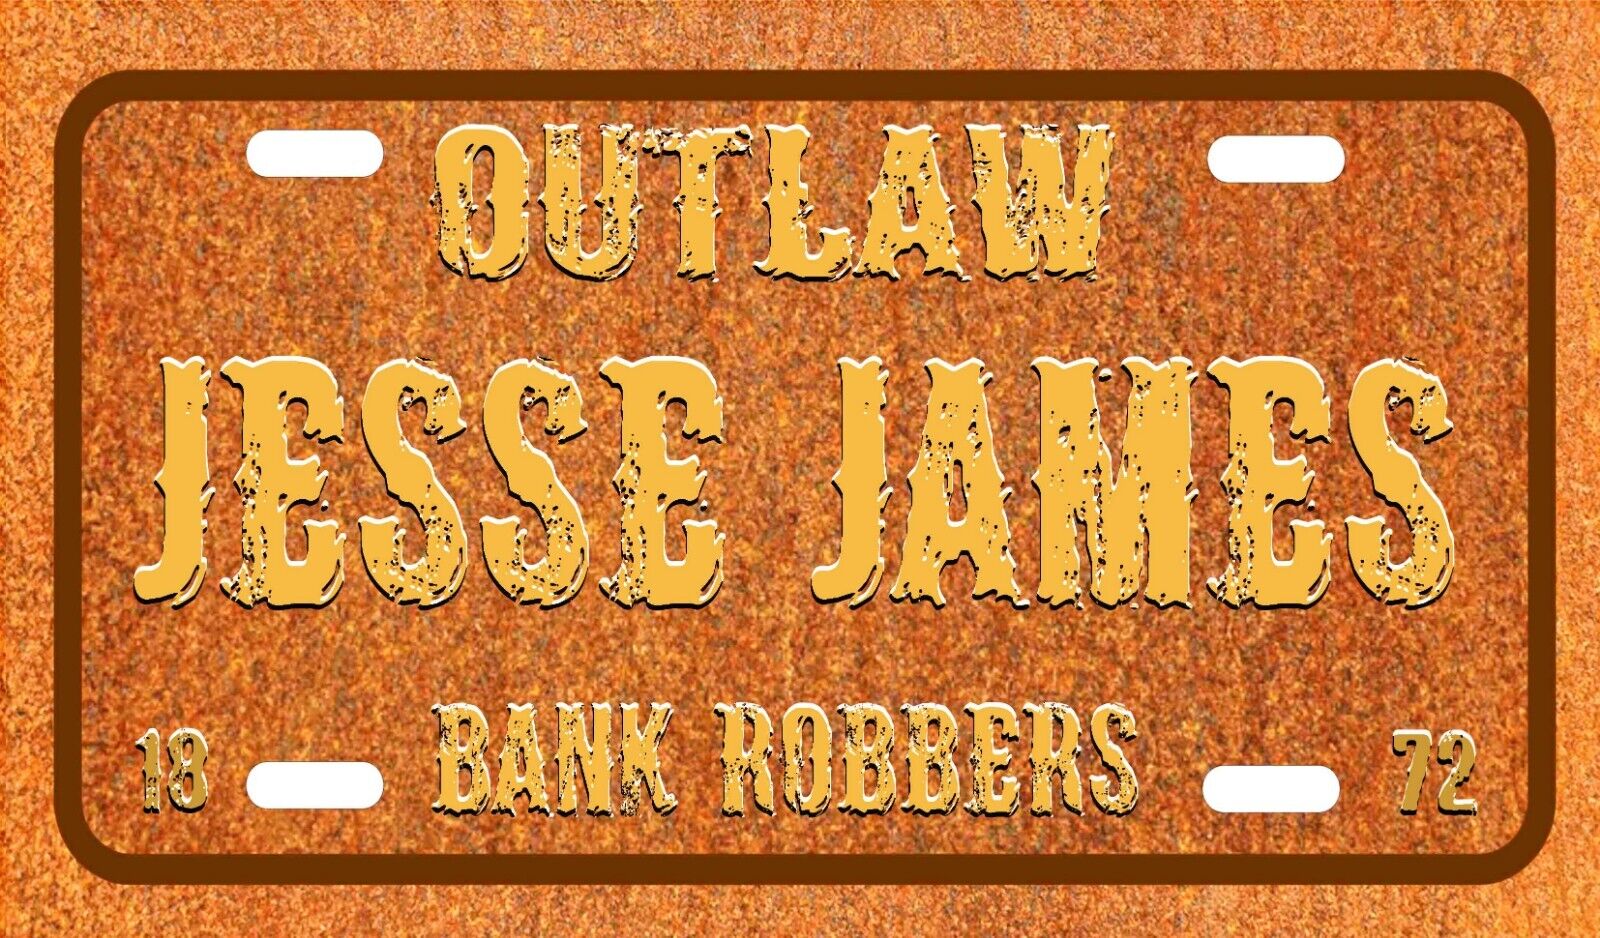 OUTLAW JESSE JAMES Car Truck license plate Old WEST COWBOYS BANK ROBBERS